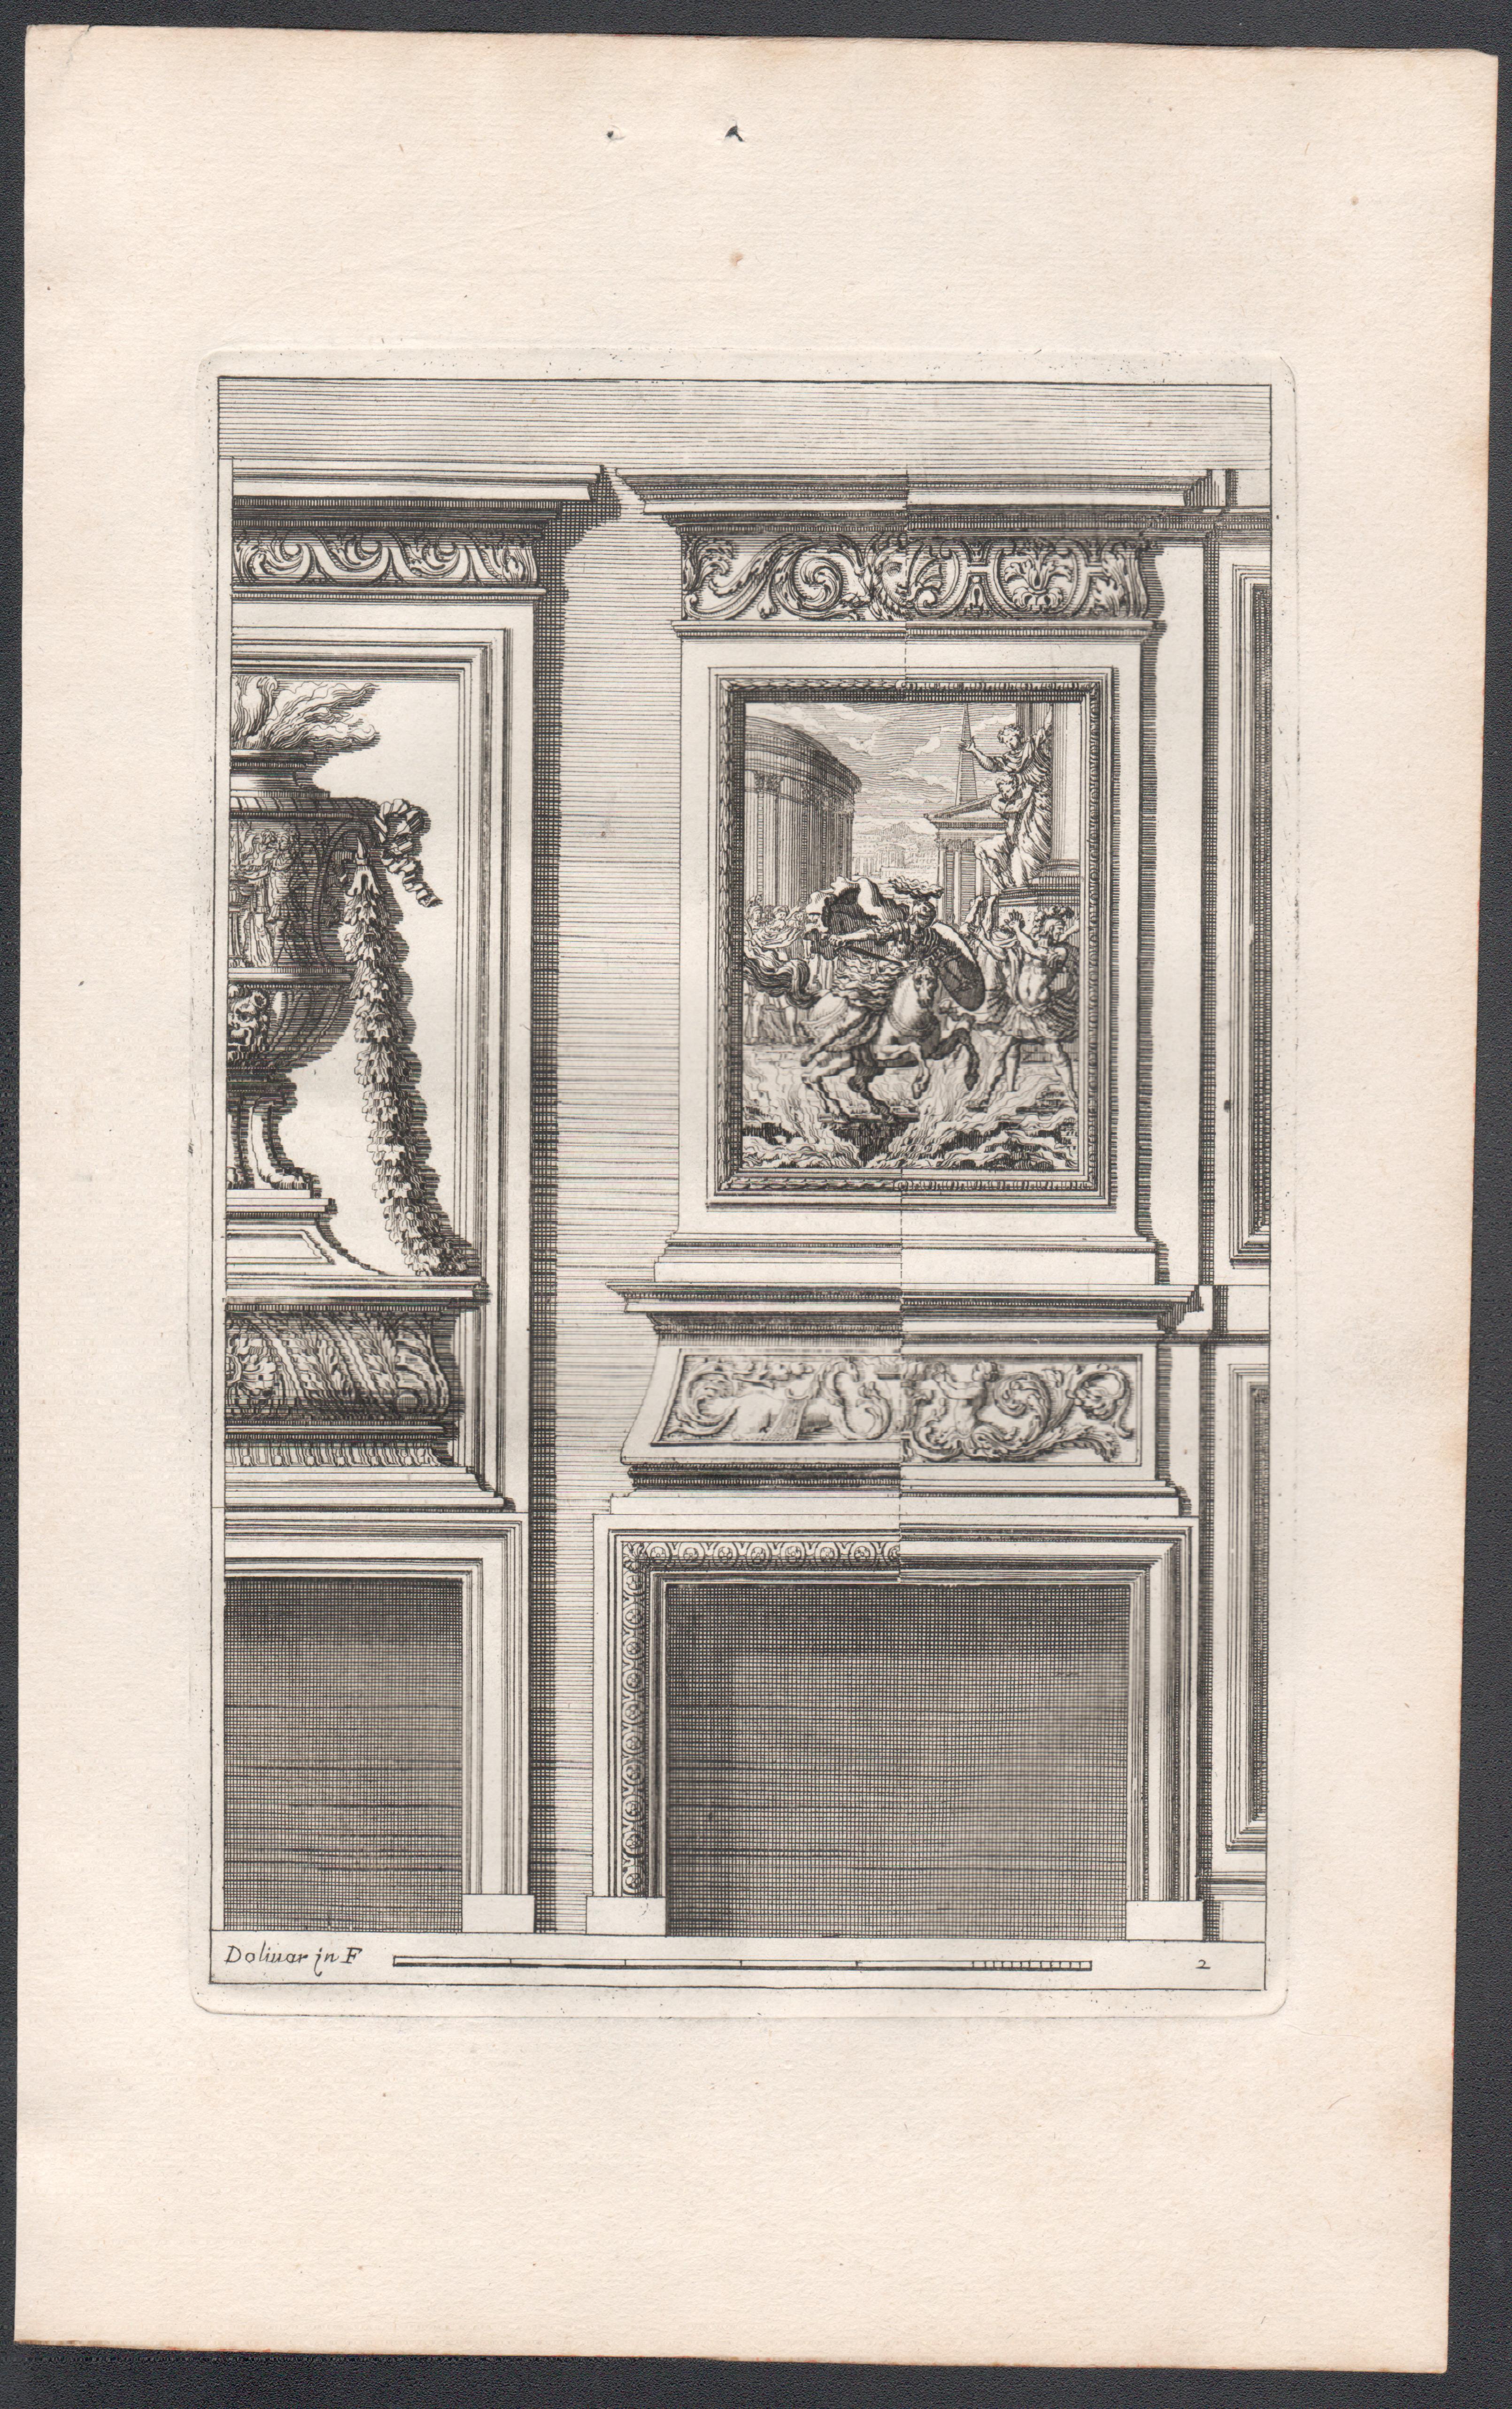 Set of 6 French Louis XIV period chimney-piece design engravings by Jean Dolivar For Sale 4